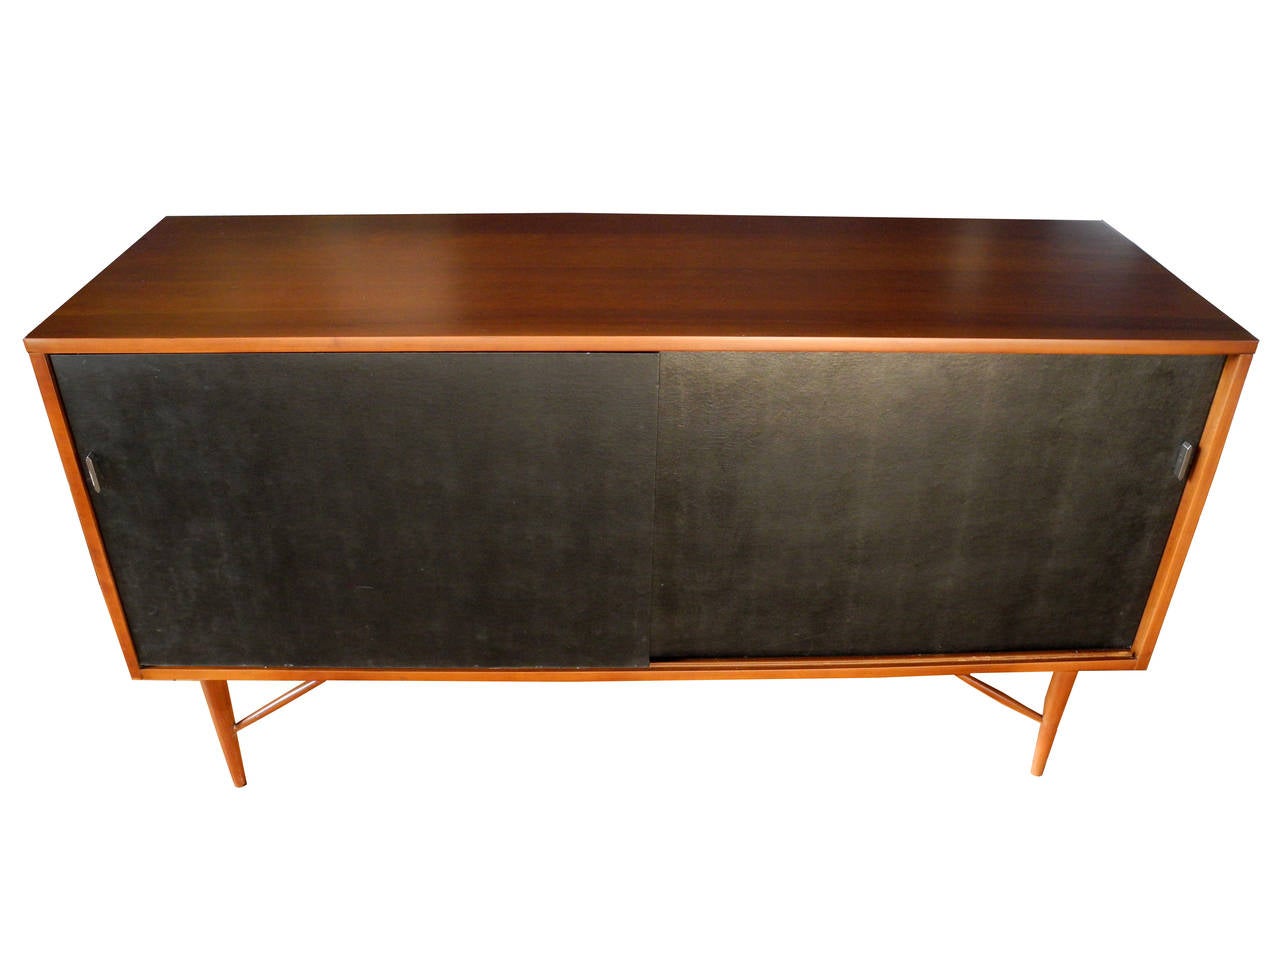 This cabinet is made of solid cherrywood. The doors are covered in black naugahyde leather. The handles are cut steel. This case piece can be used as a credenza for office storage or in the dining room for sideboard use. Also, there is a spot for